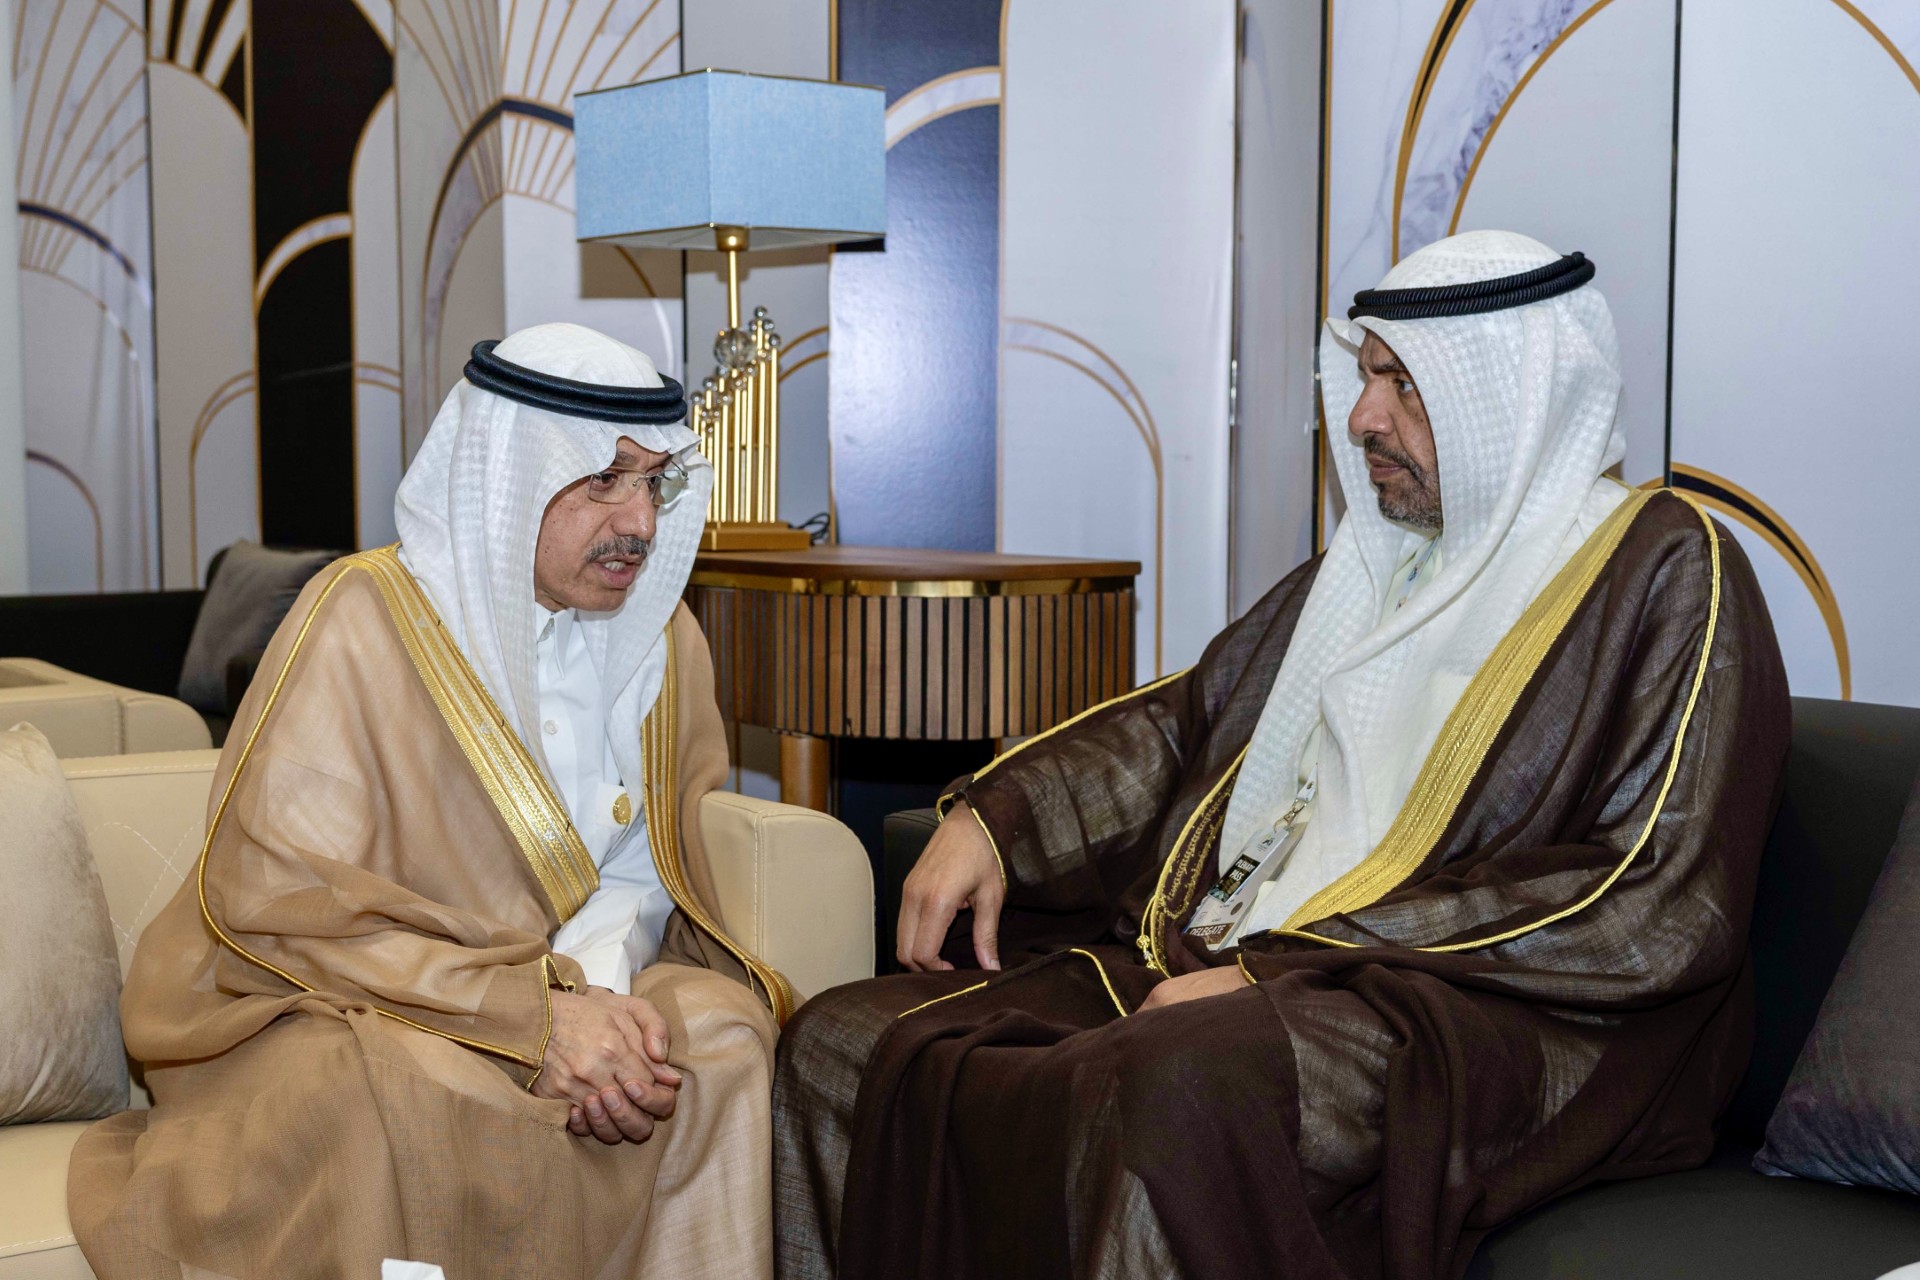 Representative of His Highness the Amir, the Foreign Minister meets Chairman of the Islamic Development Bank on the fringes of the OIC Summit